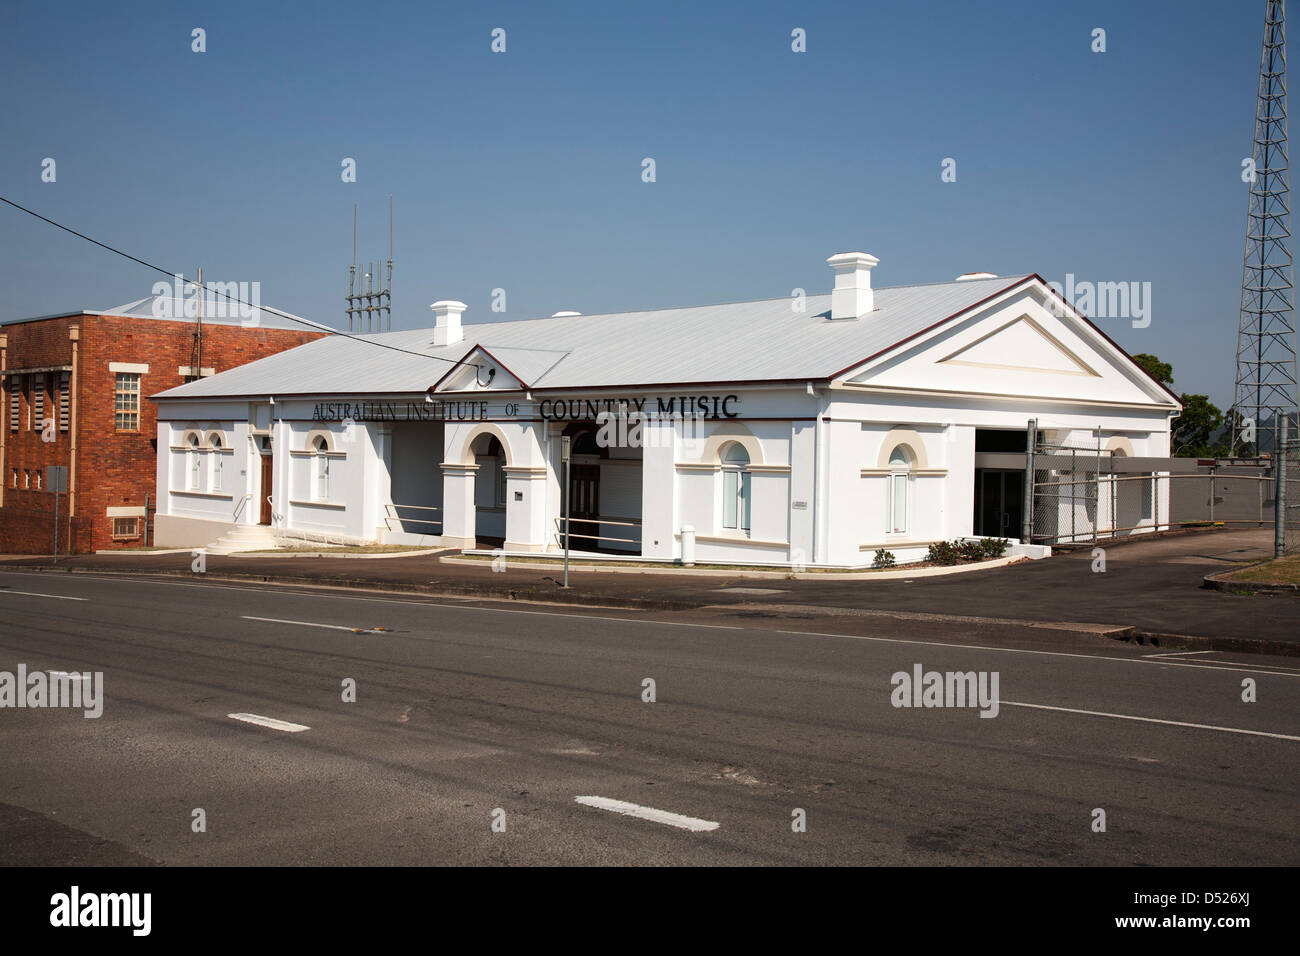 Australian Institute of Country Music building on Channon Street Gympie Queensland Australia Stock Photo